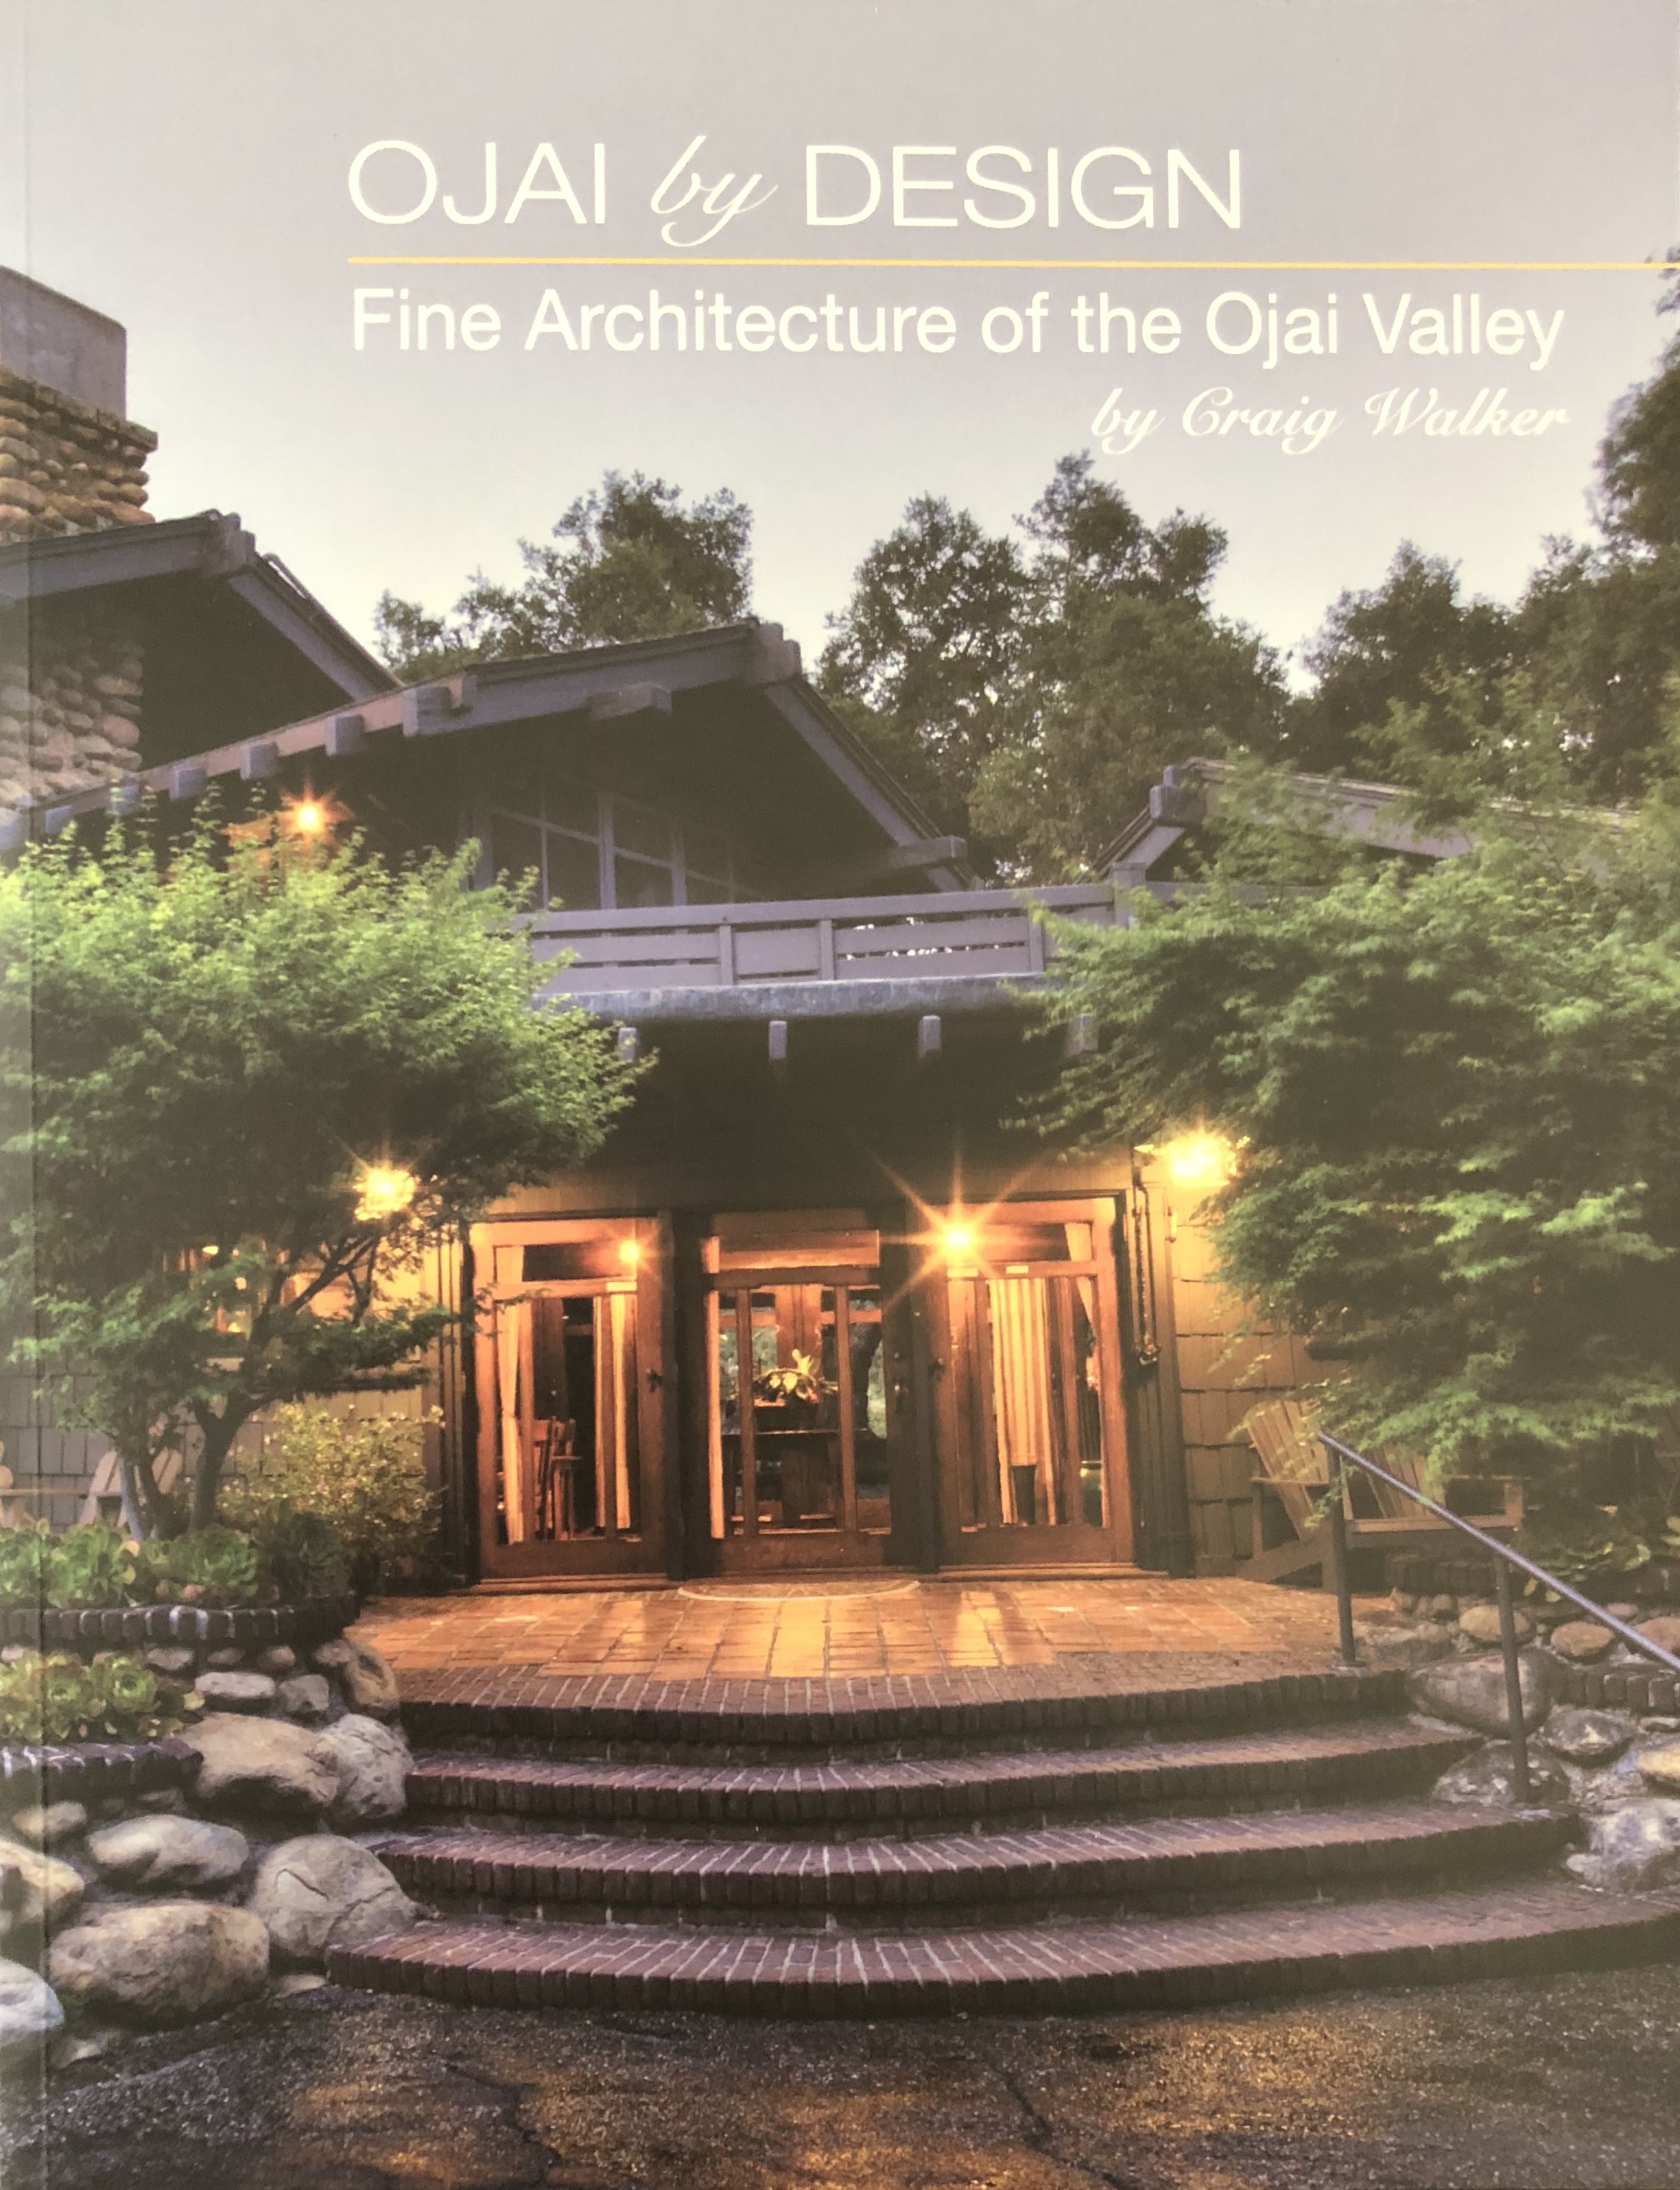 Ojai by Design Fine Architecture of the Ojai Valley, by Craig Walker